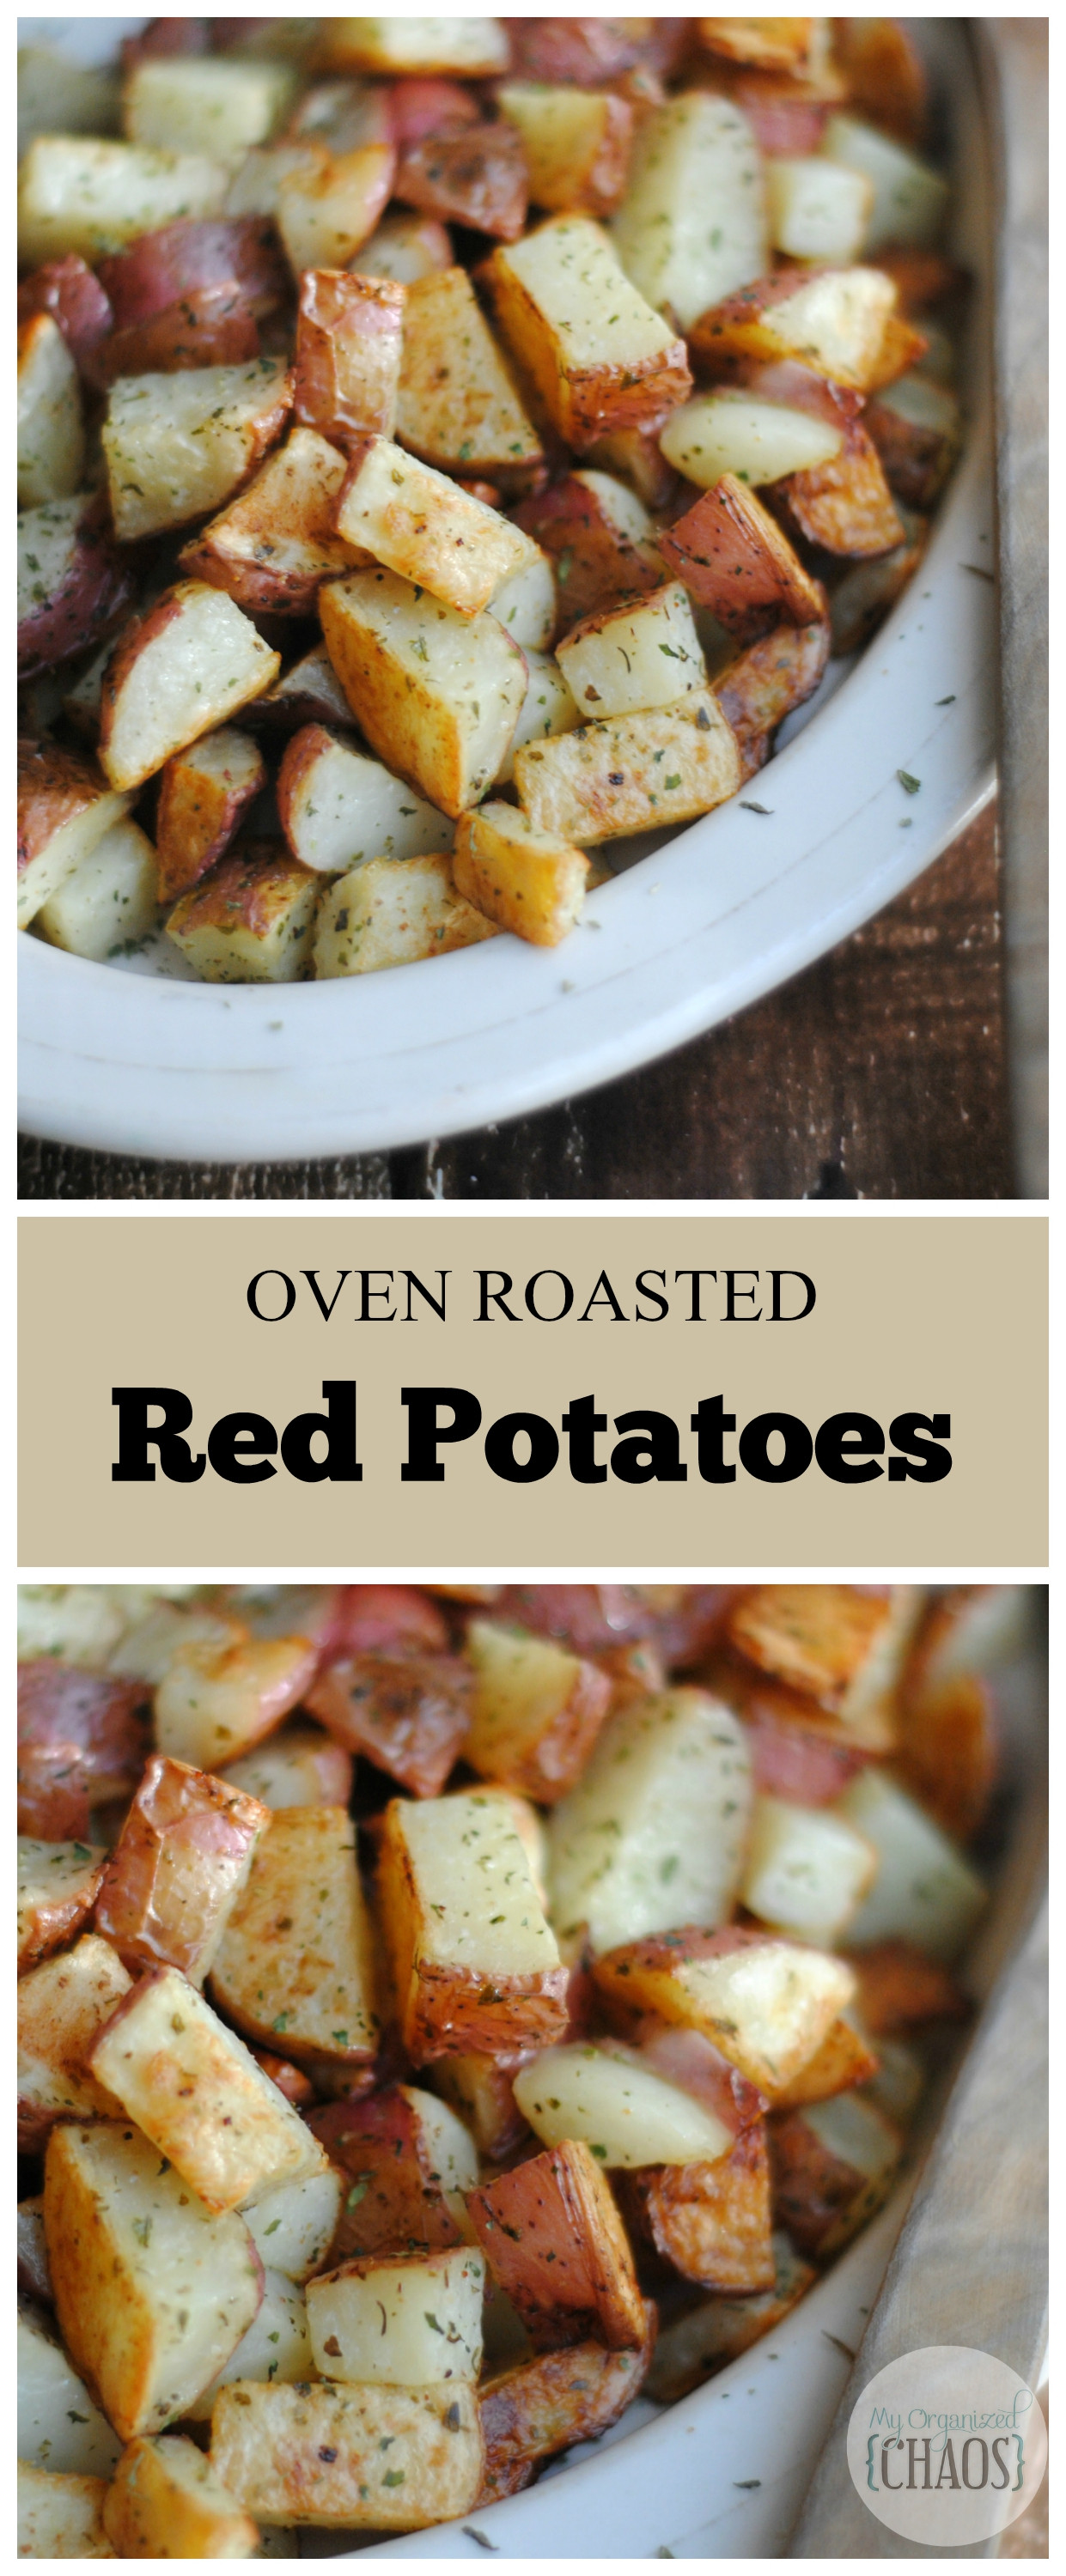 Roasted Red Potatoes Recipe
 Oven Roasted Red Potatoes